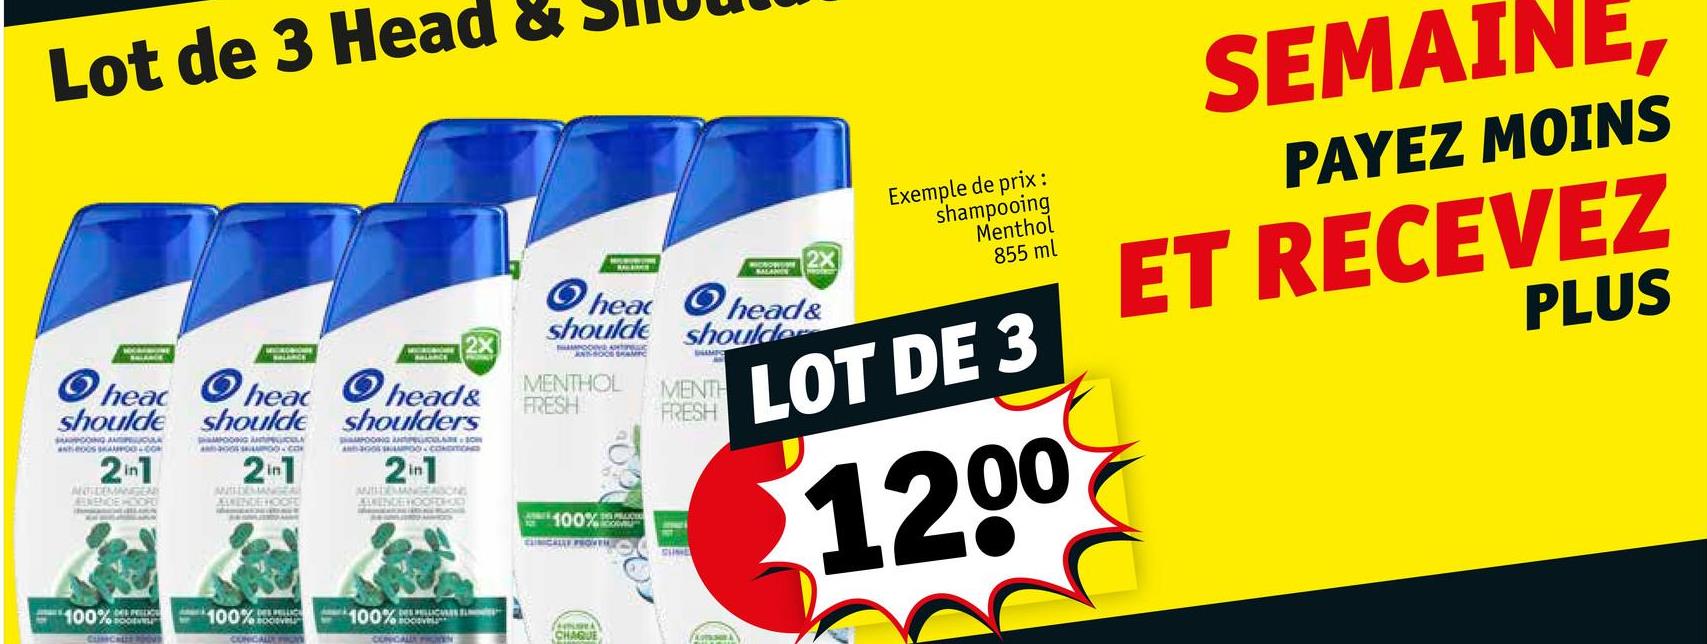 Lot de 3 Head &
heac
shoulde
SUGOING AND
2in1
ANTIDEMANGEN
ENENCE HOOPE
head
shoulde
MOONG ANTICOLA
2in1
ANSHDEMANGEAL
WENDE HOOFE
O
2X
head&
shoulders
HAMPOOING ANO
AND-GOOD CONDITIONED
21
ANTHERANGEASONS
KUNENDE HOOFDHED
2X
head head&
shoulder
shoulde
ANSOCE SAMIC
MENTHOL
FRESH
100%
MENTH
FRESH
Exemple de prix:
shampooing
Menthol
855 ml
LOT DE 3
1200
SEMAINE,
PAYEZ MOINS
ET RECEVEZ
PLUS
100%
DES PELLICE
100%
BOCIOVEL
100%
CHAQUE